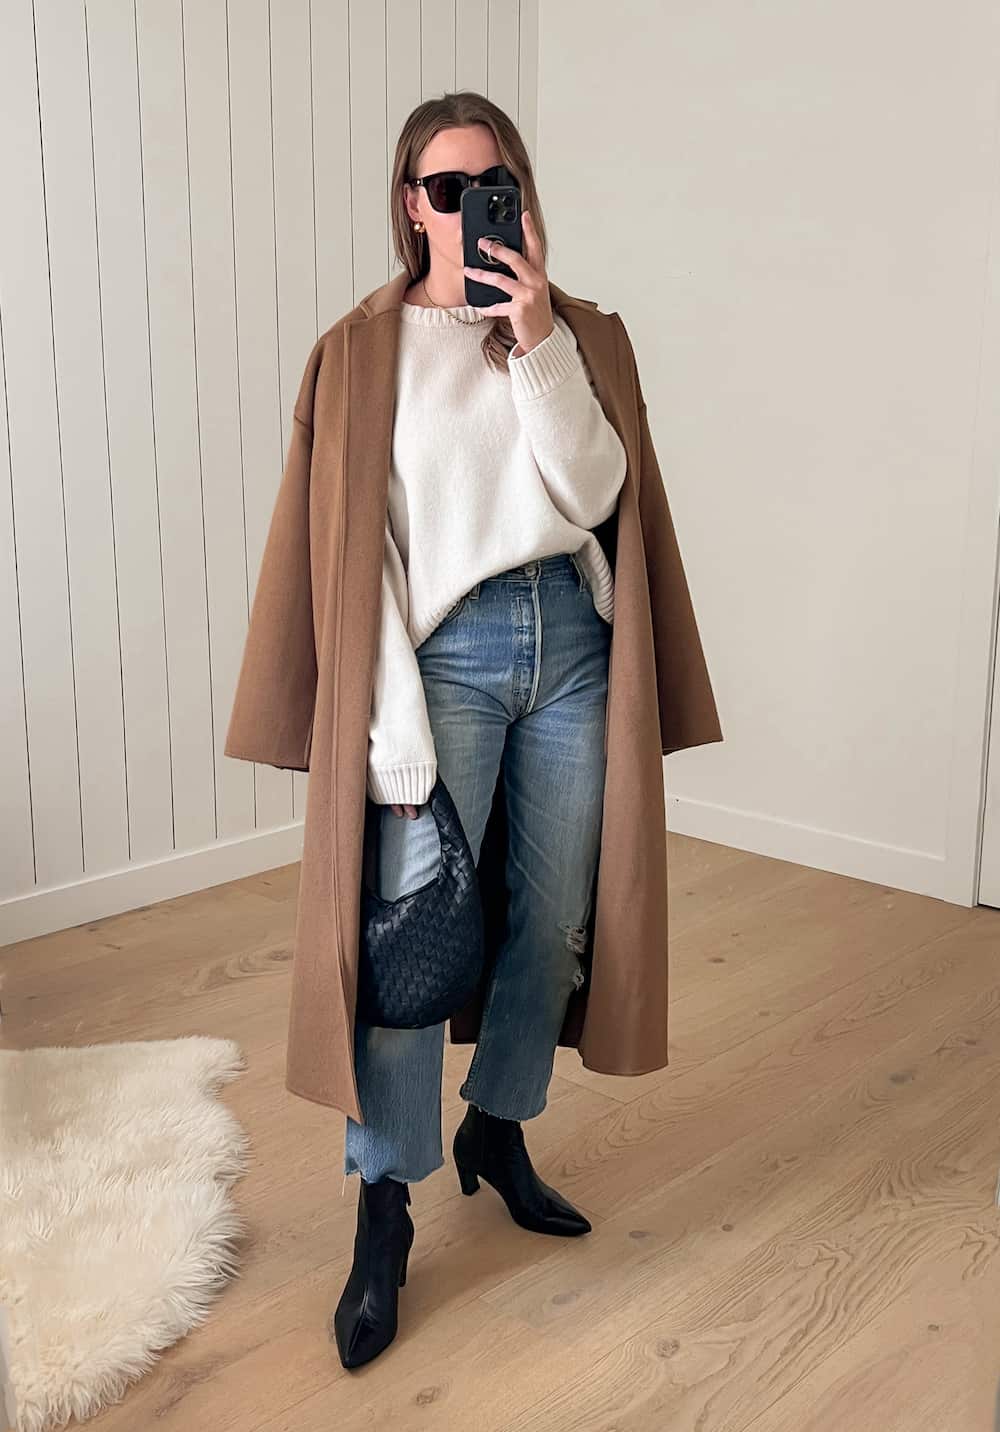 Christal wearing jeans with a white sweater and a brown coat with black booties.